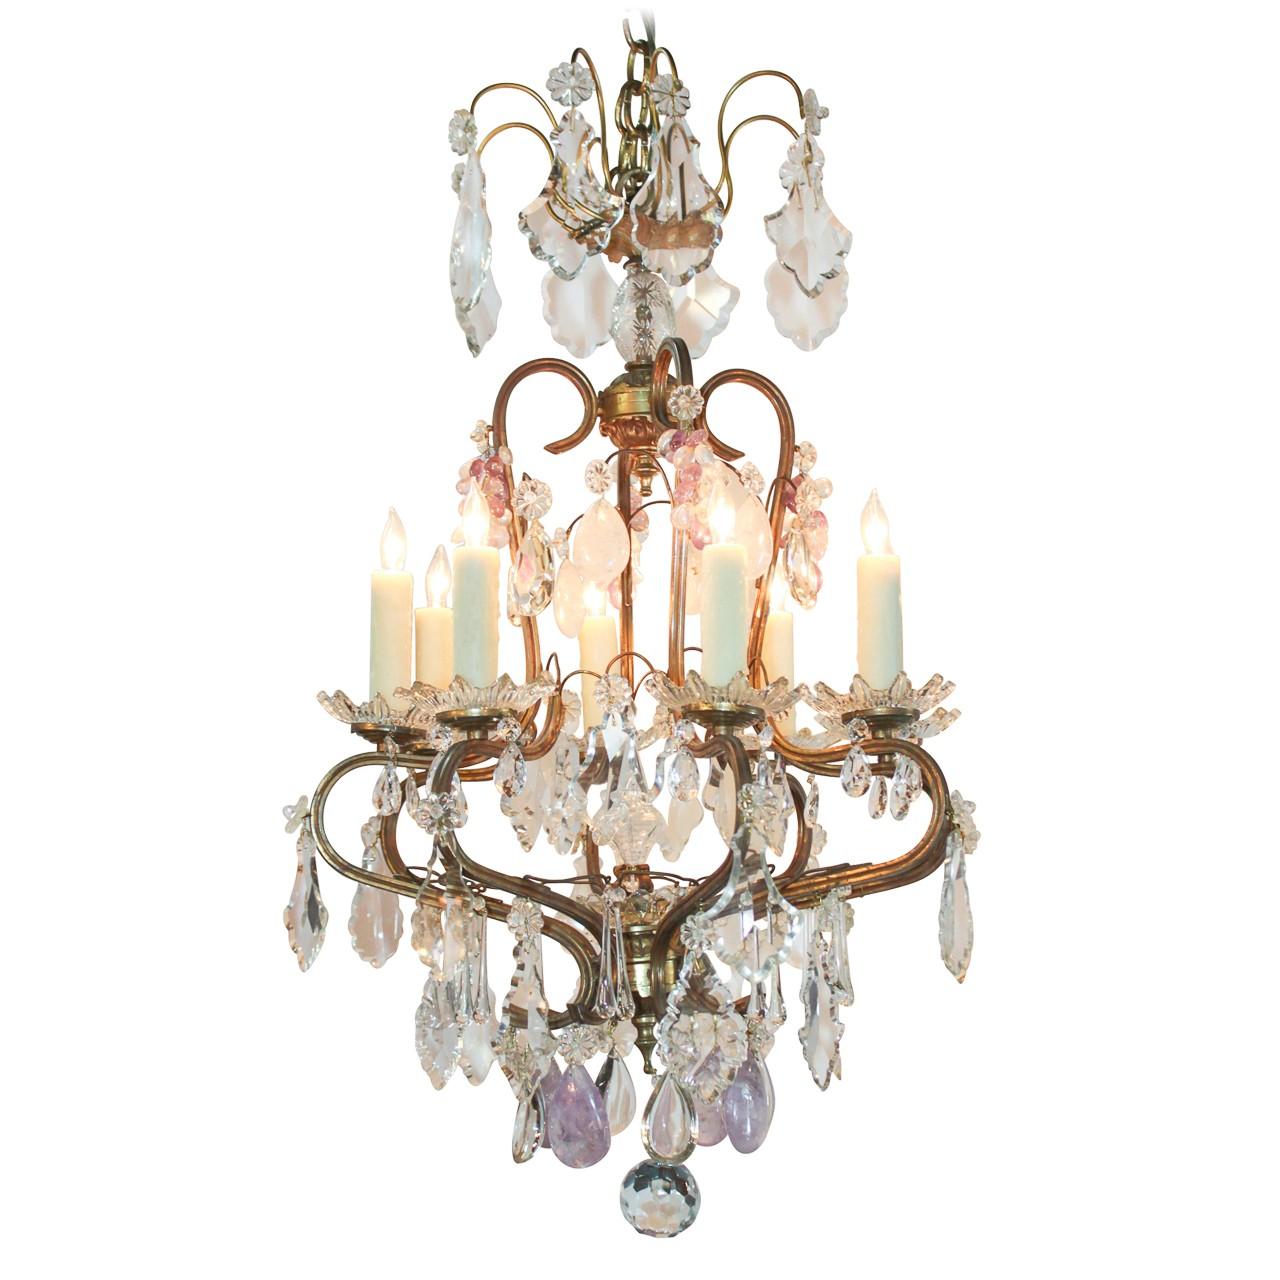 19th Century French Rock Crystal and Amethyst Chandelier